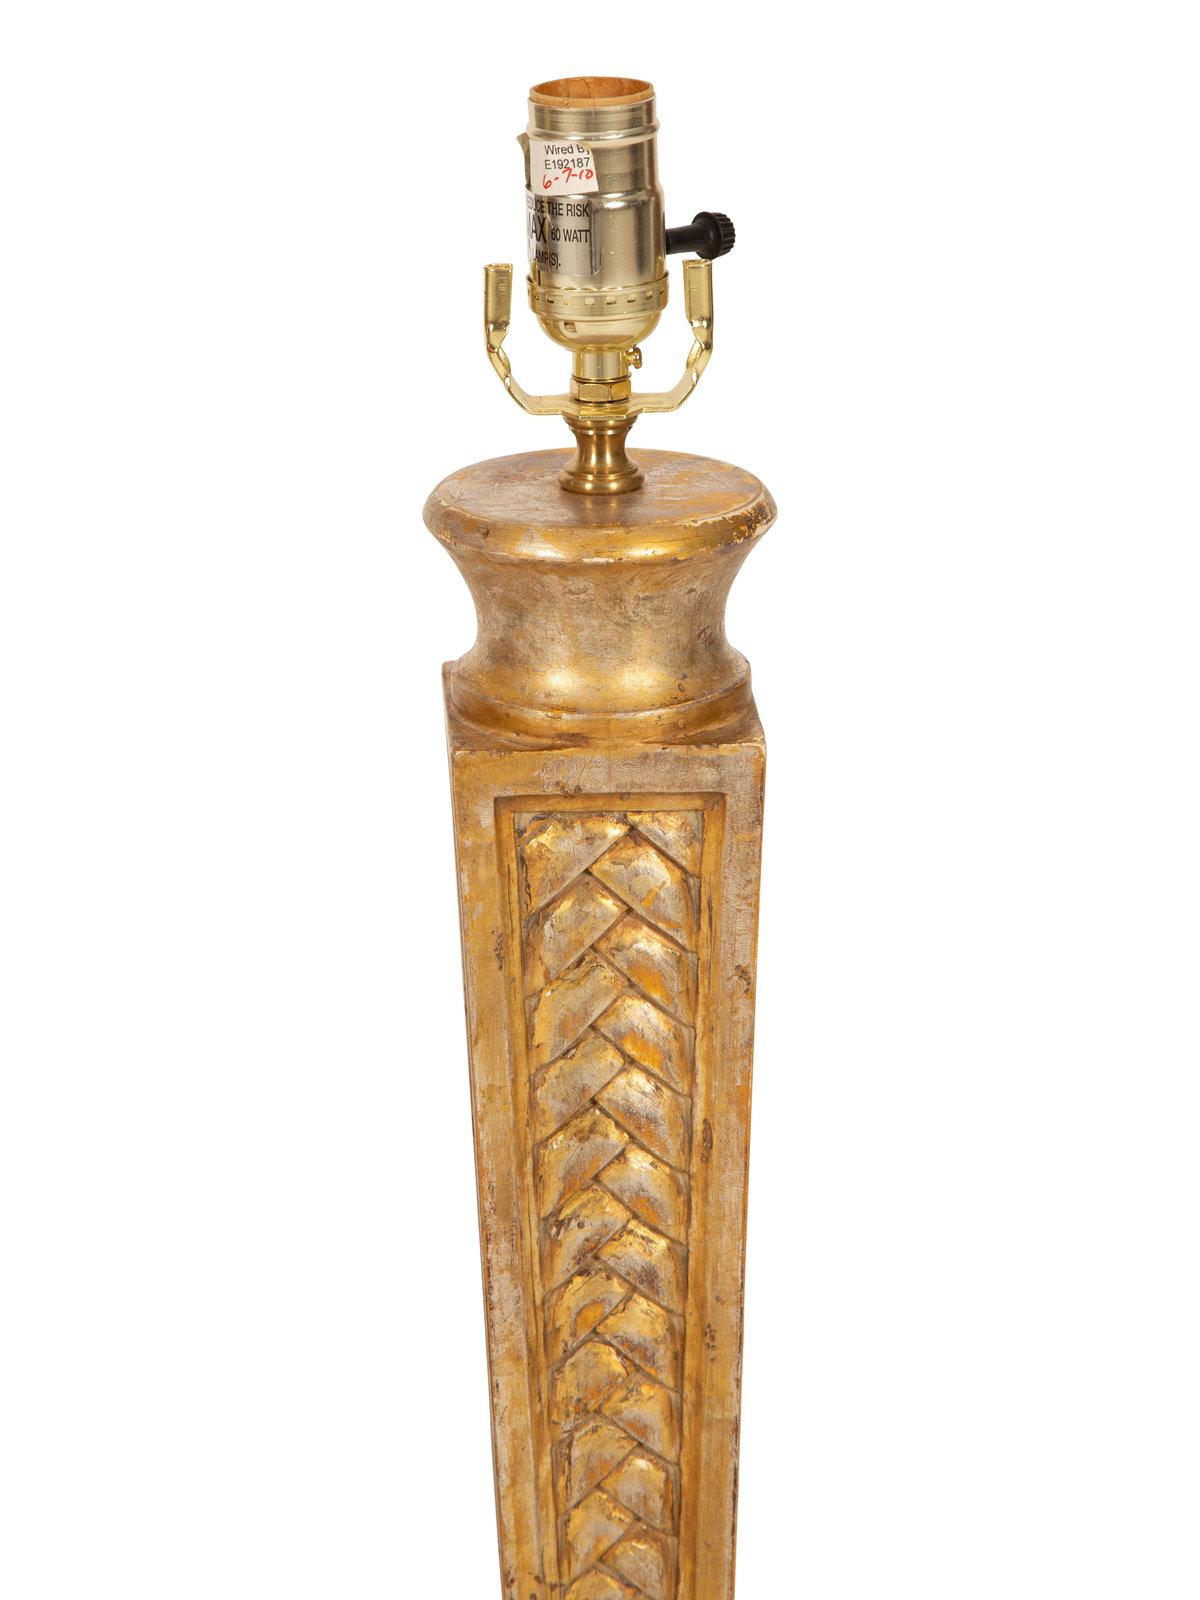 A Very Fine Pair of Carved & Giltwood Table Lamps
France, circa 1930
Overall height 29 1/2 inches. Lamp Height 18 3/4